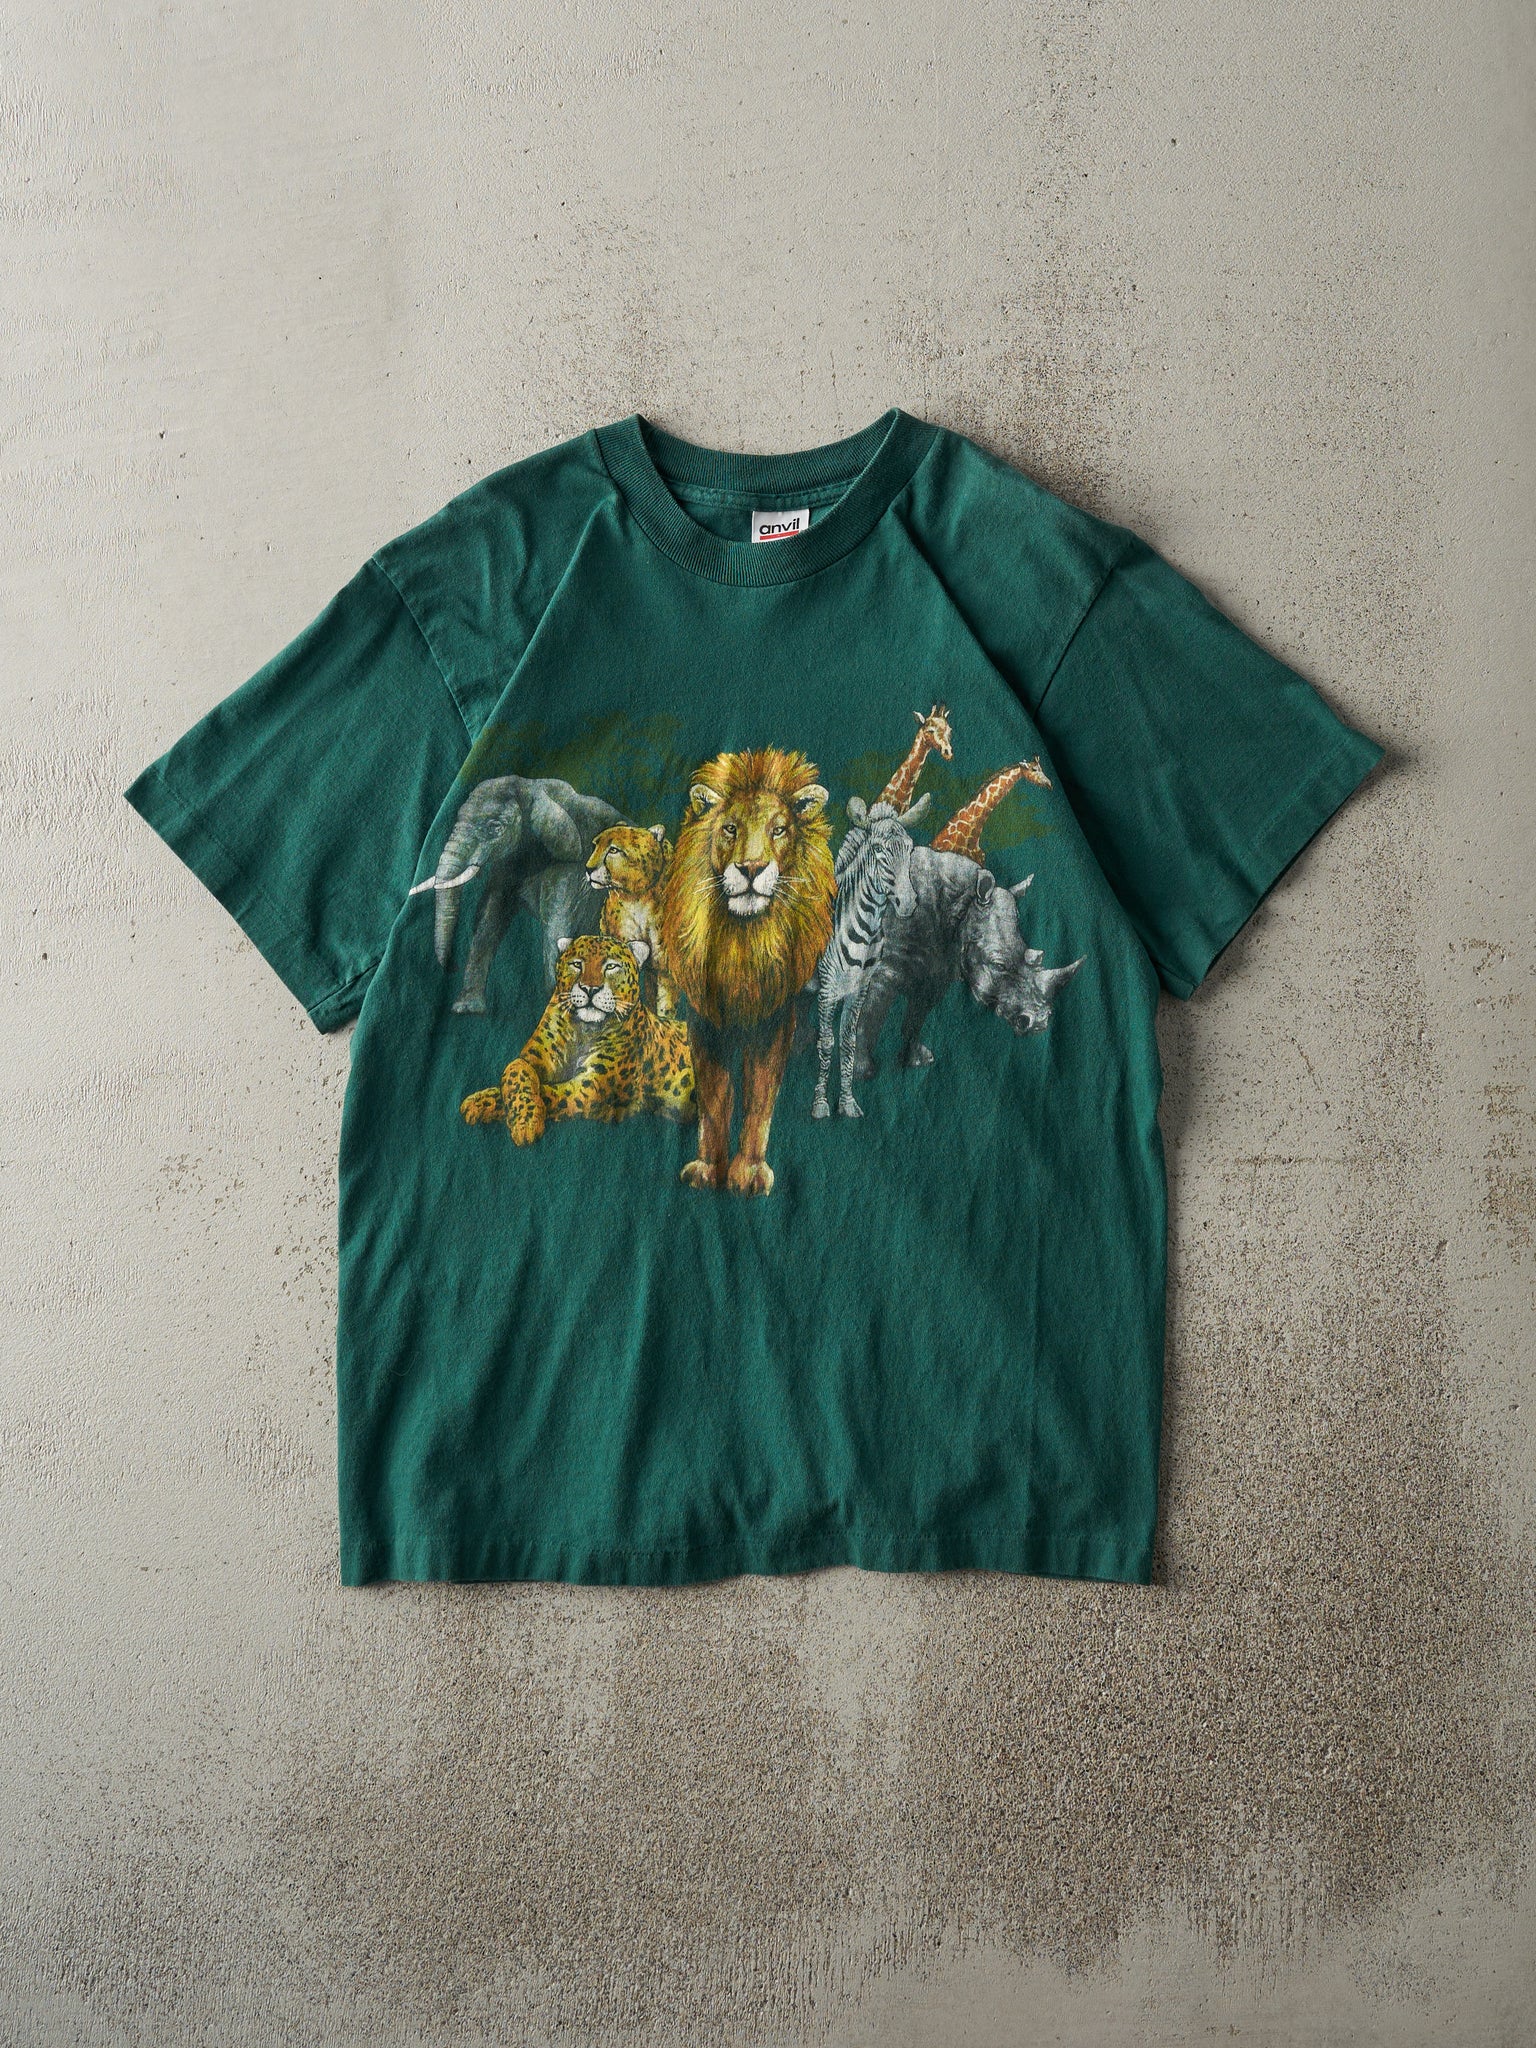 Vintage 90s Forest Green Animals Tee (XS/S)